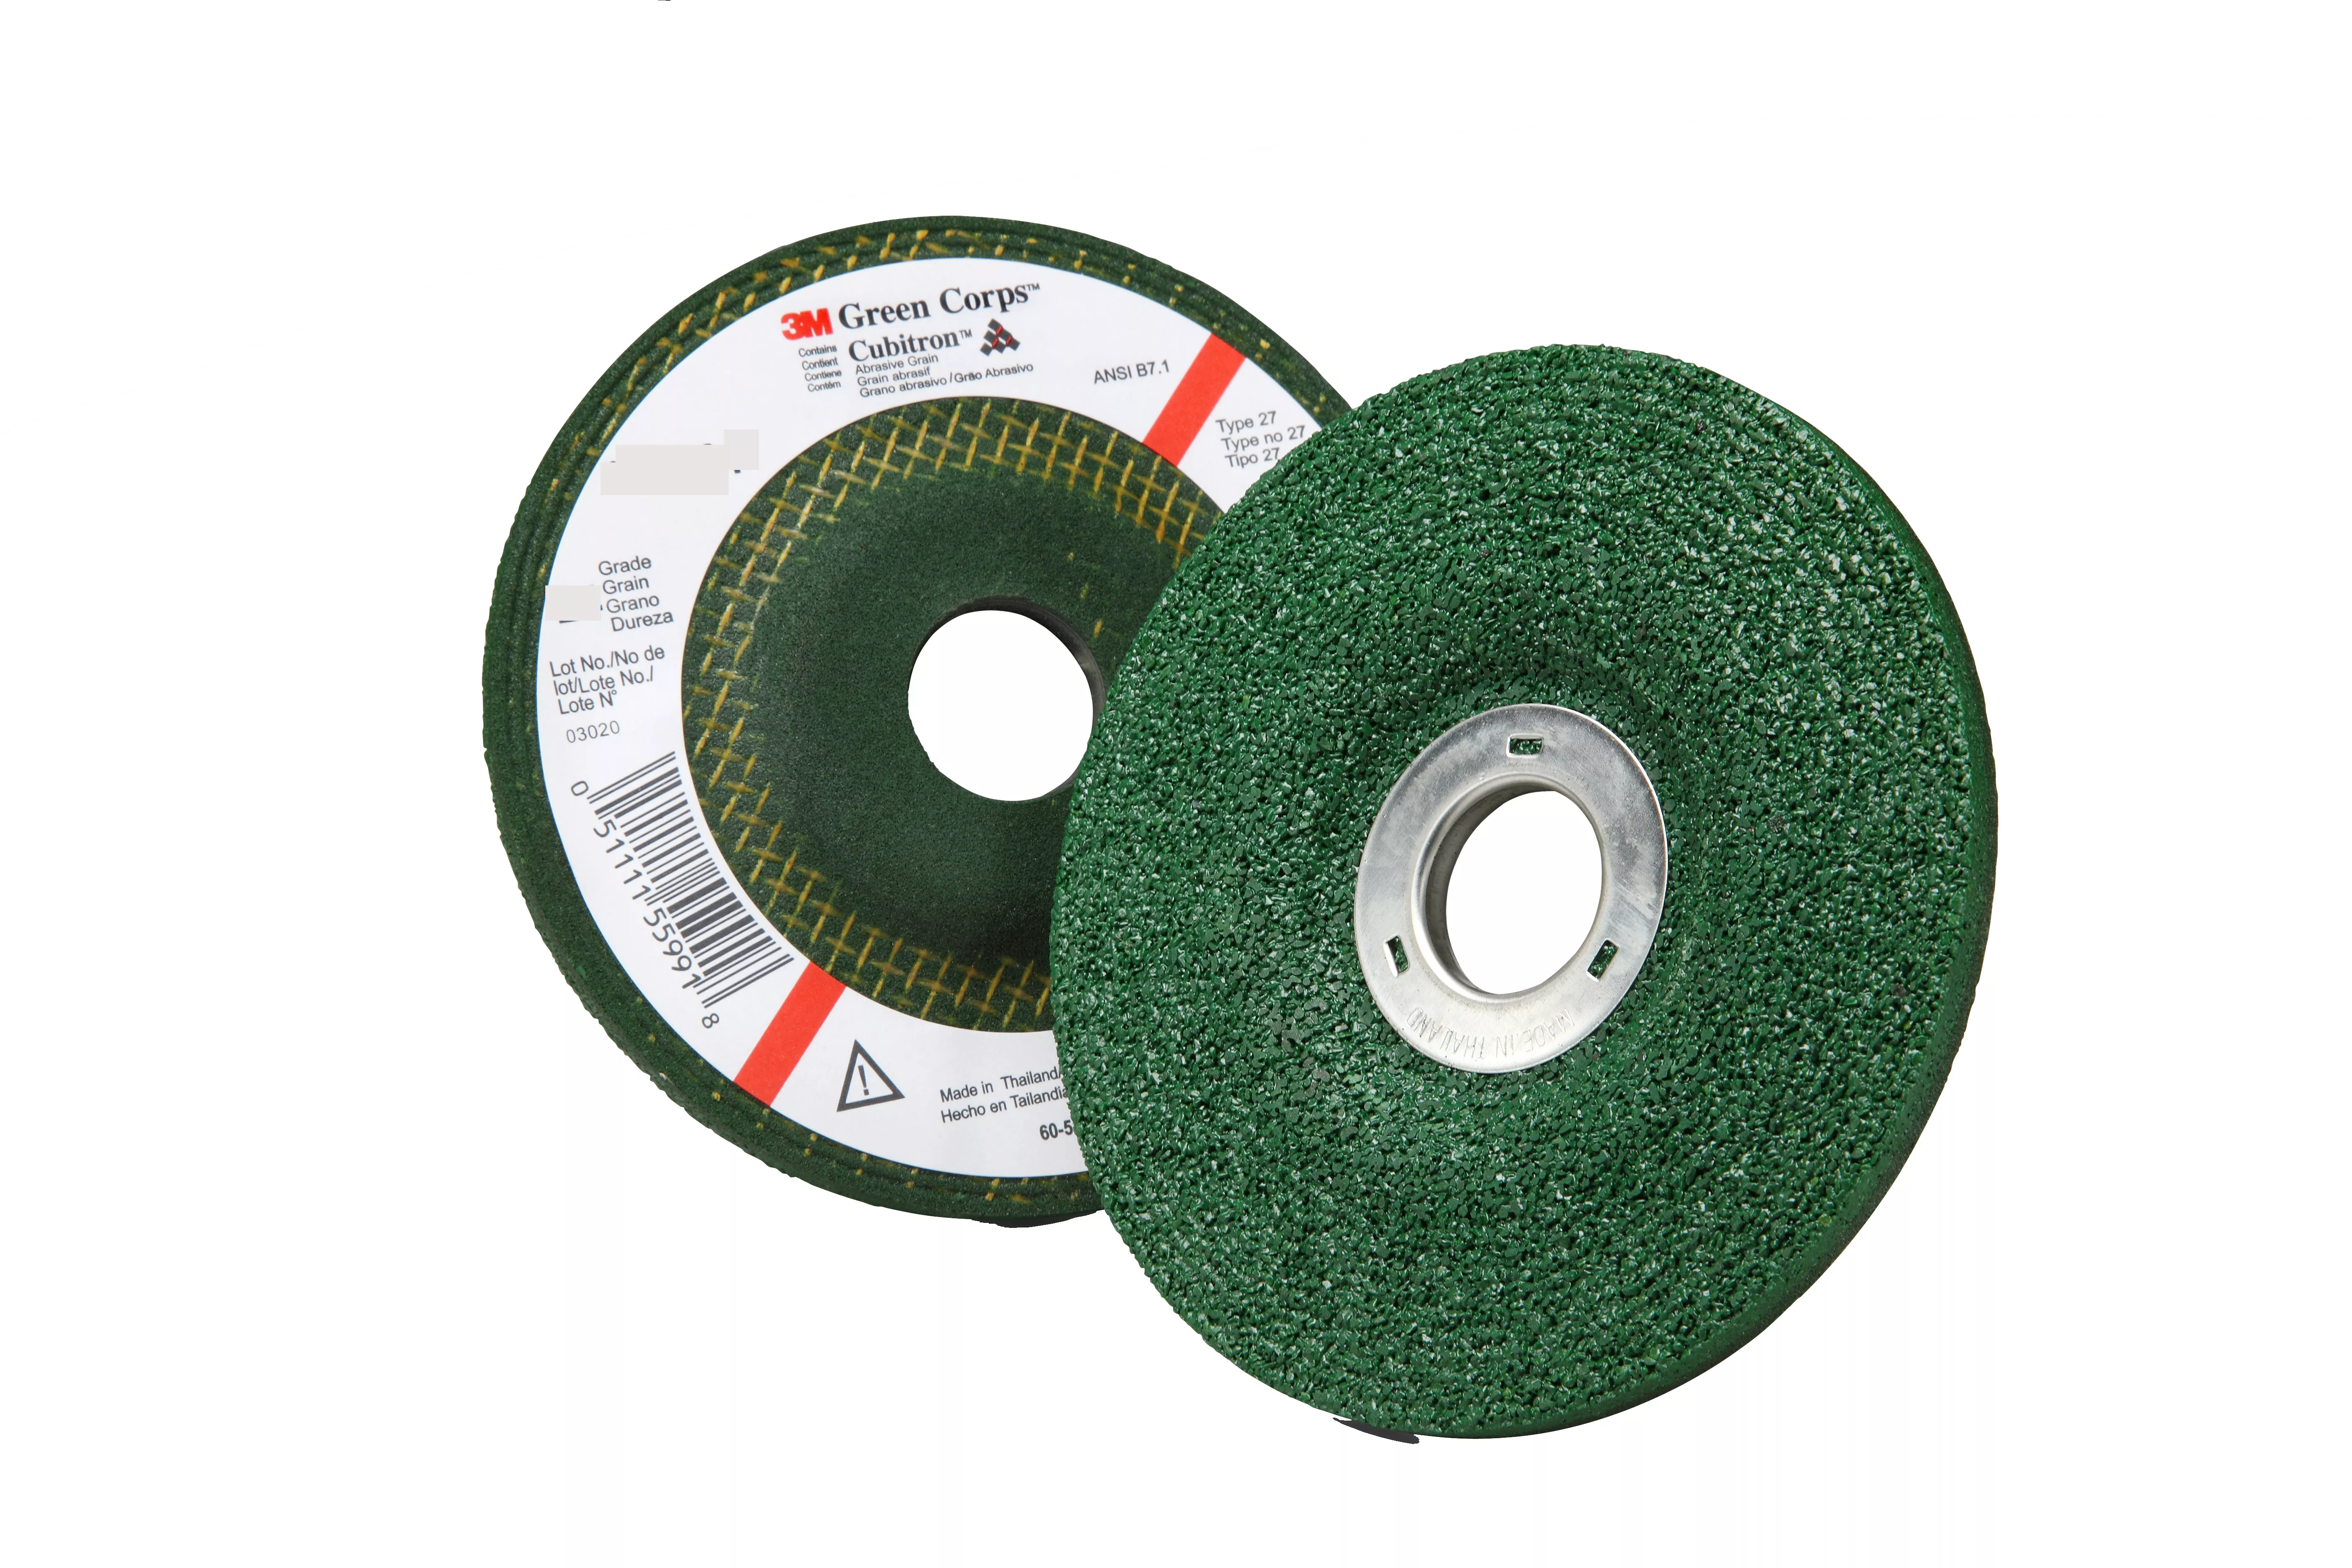 3M™ Green Corps™ Depressed Center Grinding Wheel, T27 4-1/2 in x 1/4 in
x 7/8 in, 36, 10/Carton, 40 ea/Case